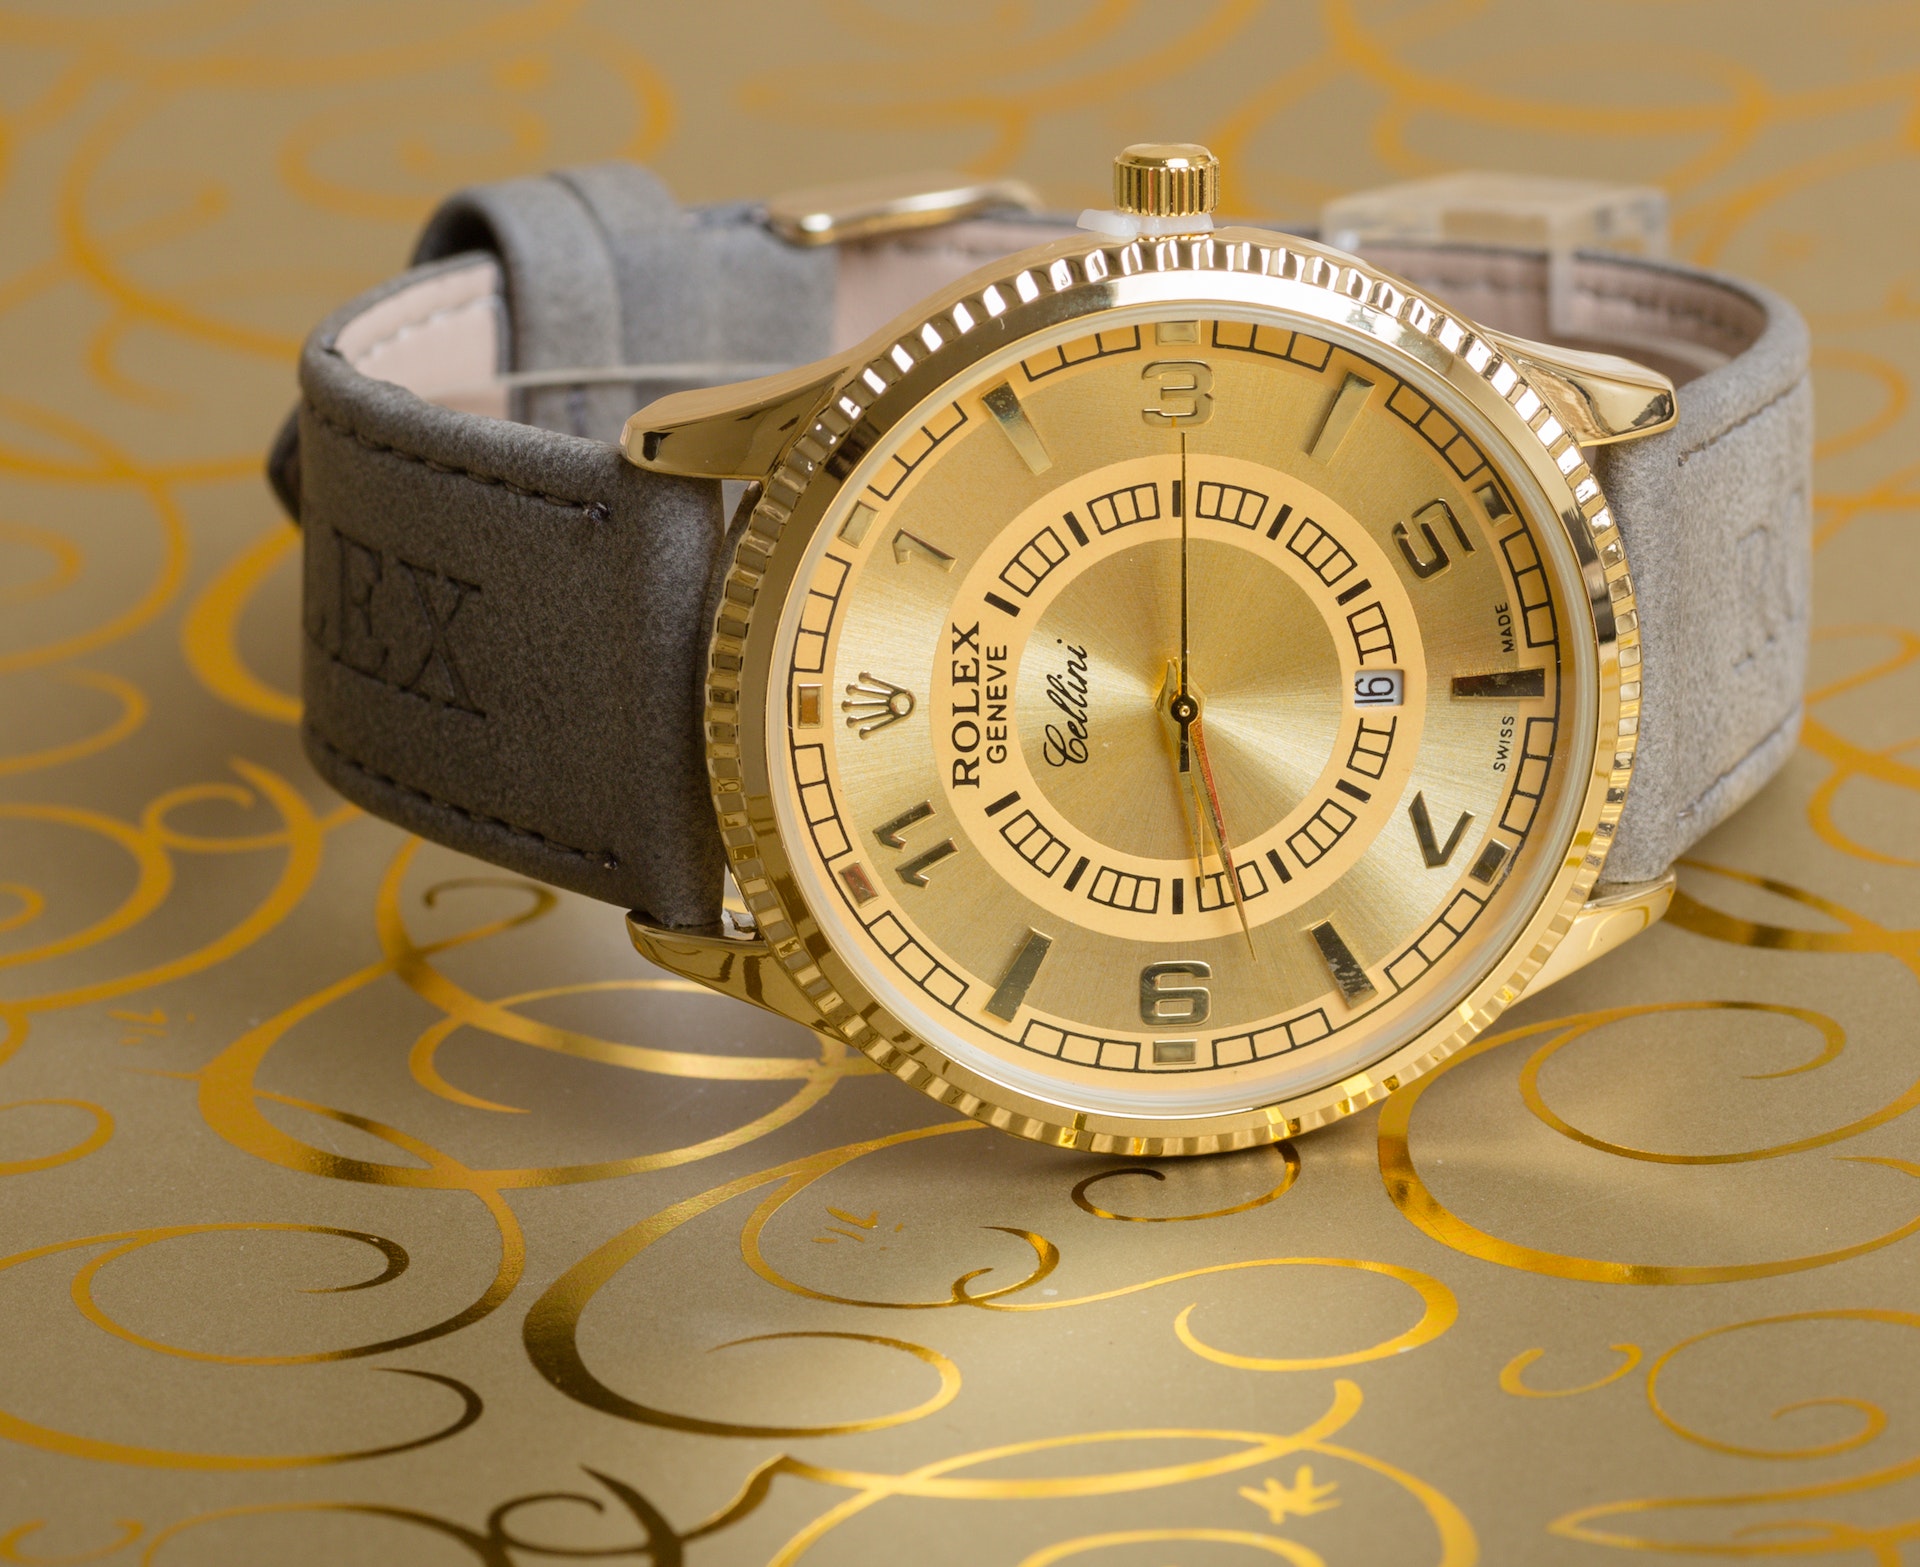 How Has Rolex Redefined Luxury Timepieces Through Innovation